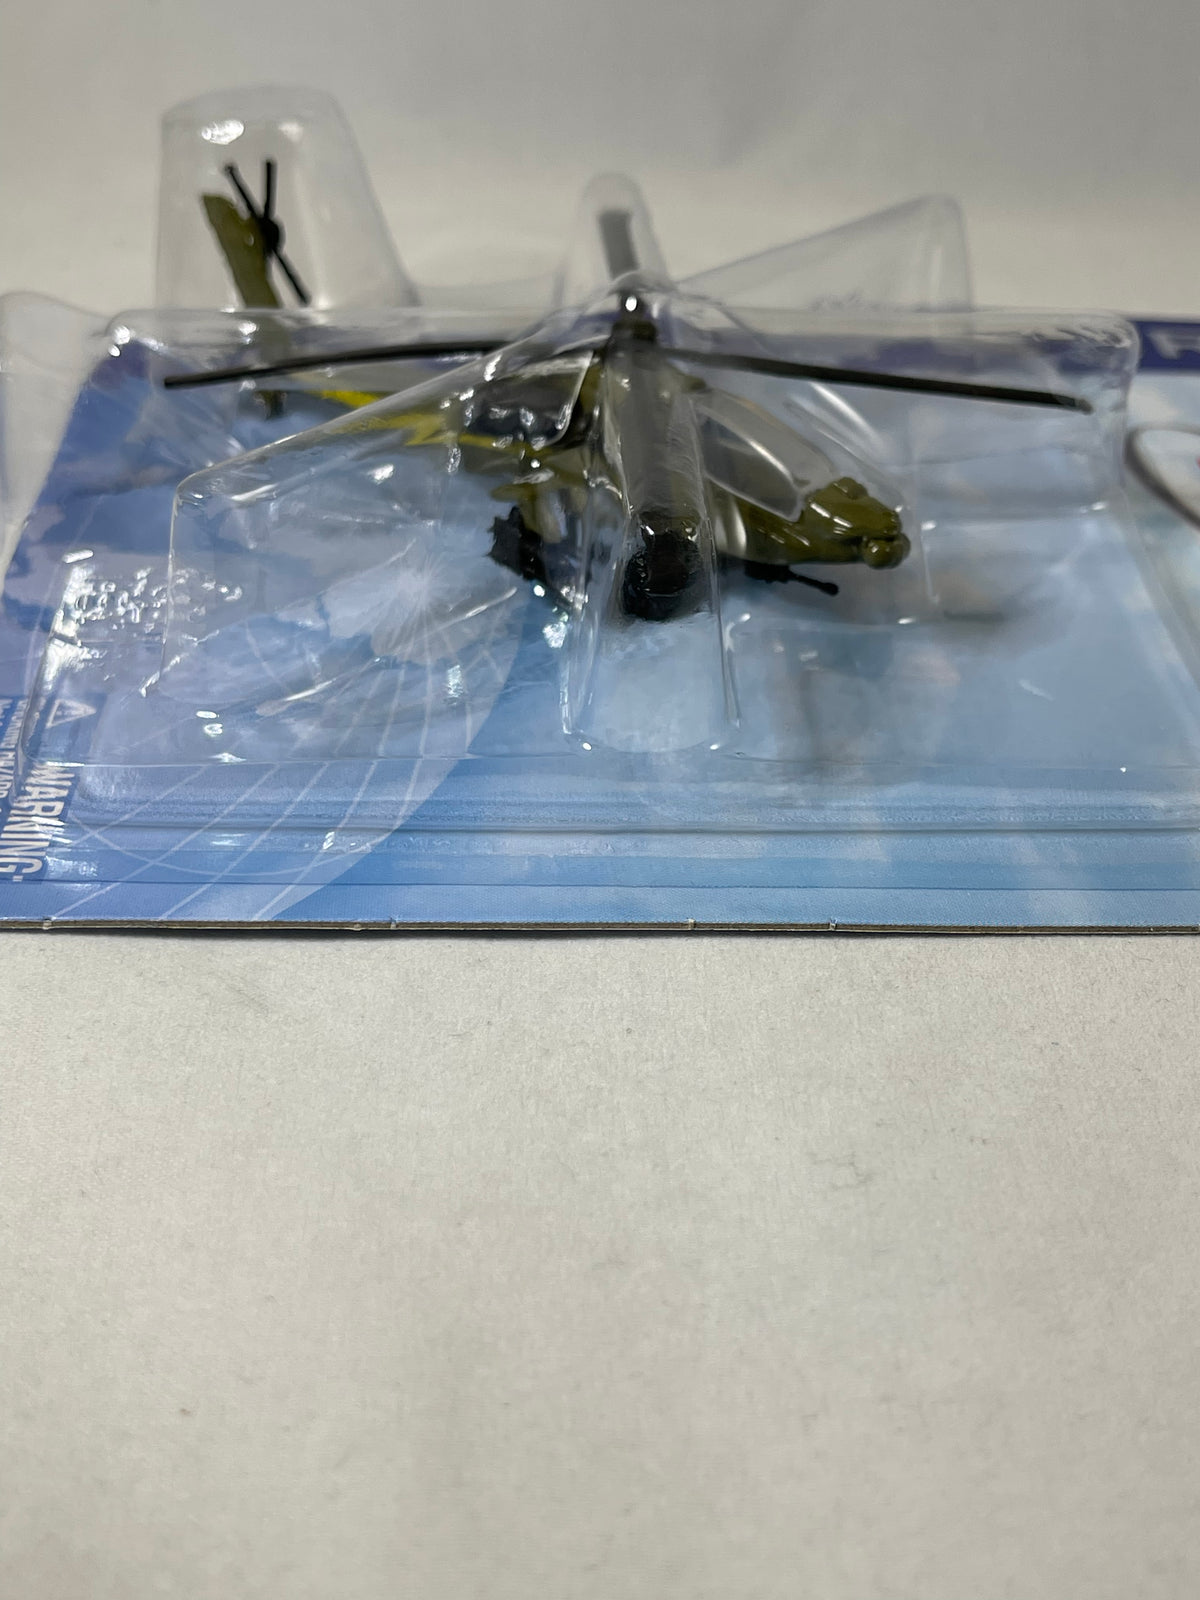 AH-64 Apache Helicopter Toy